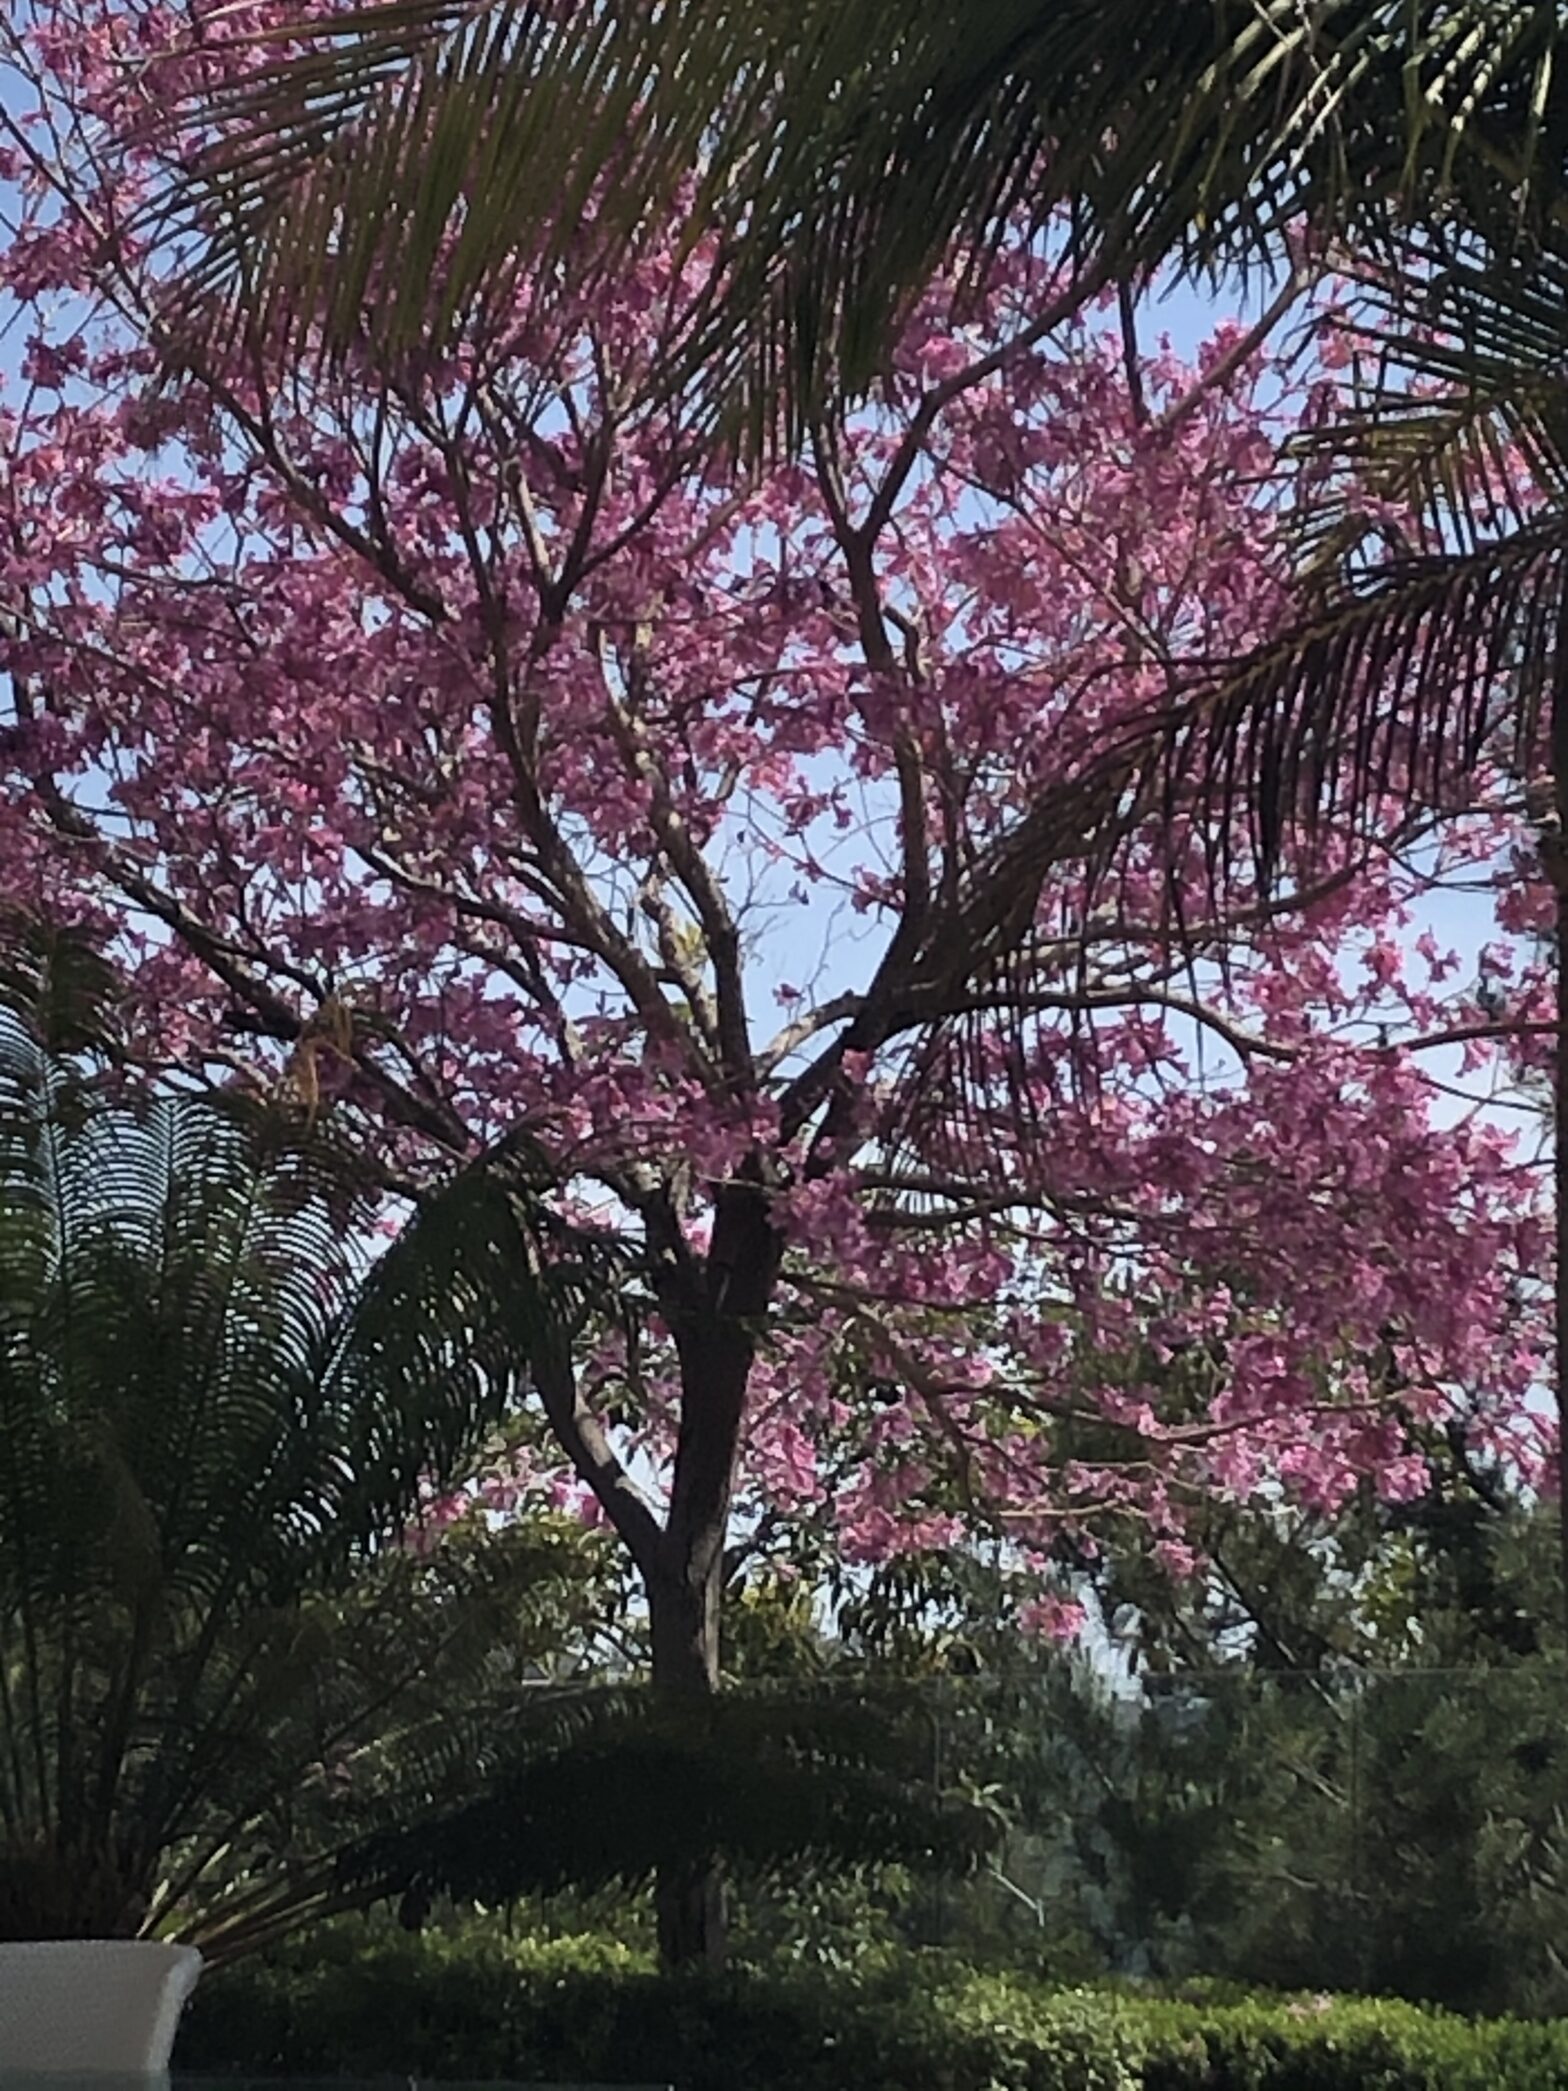 A pink tree in bloom